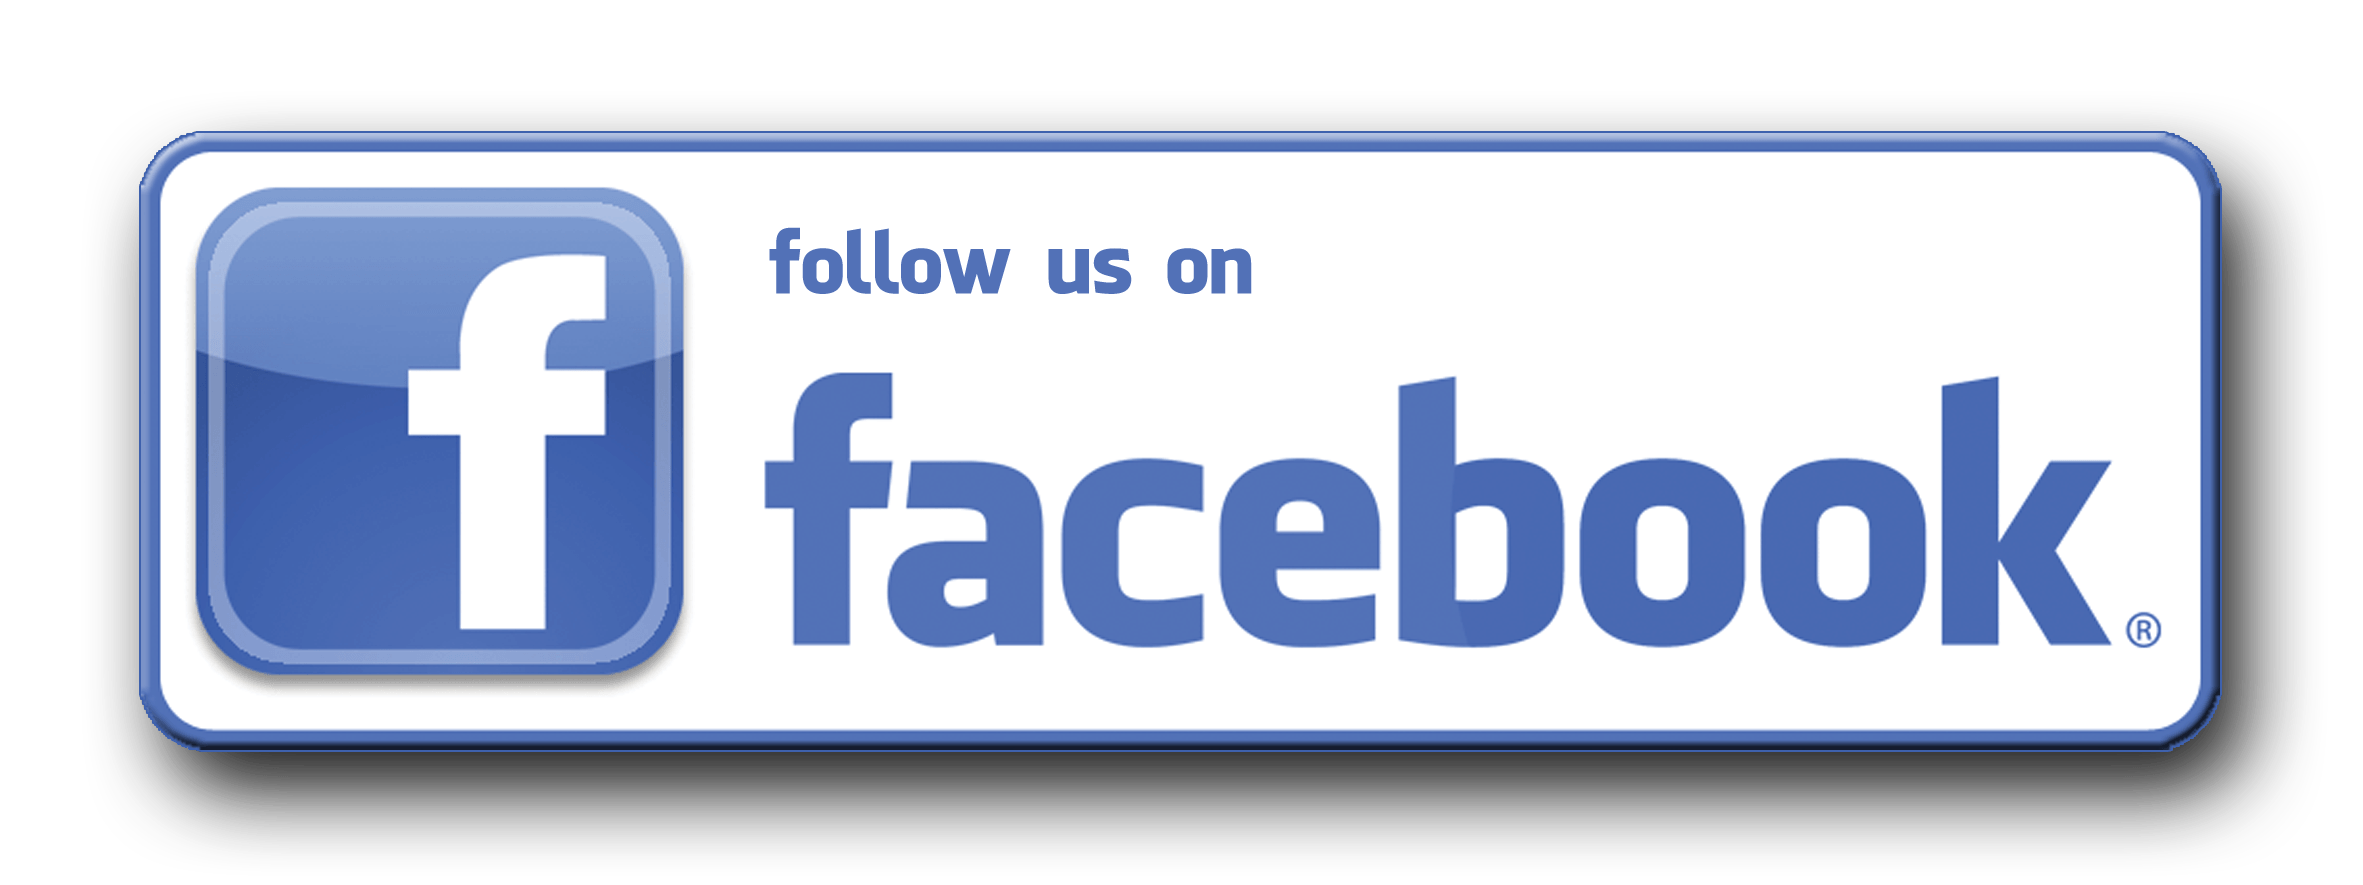 Follow Us On Facebook Logo - Landscape and Nature Discoveries, Inc